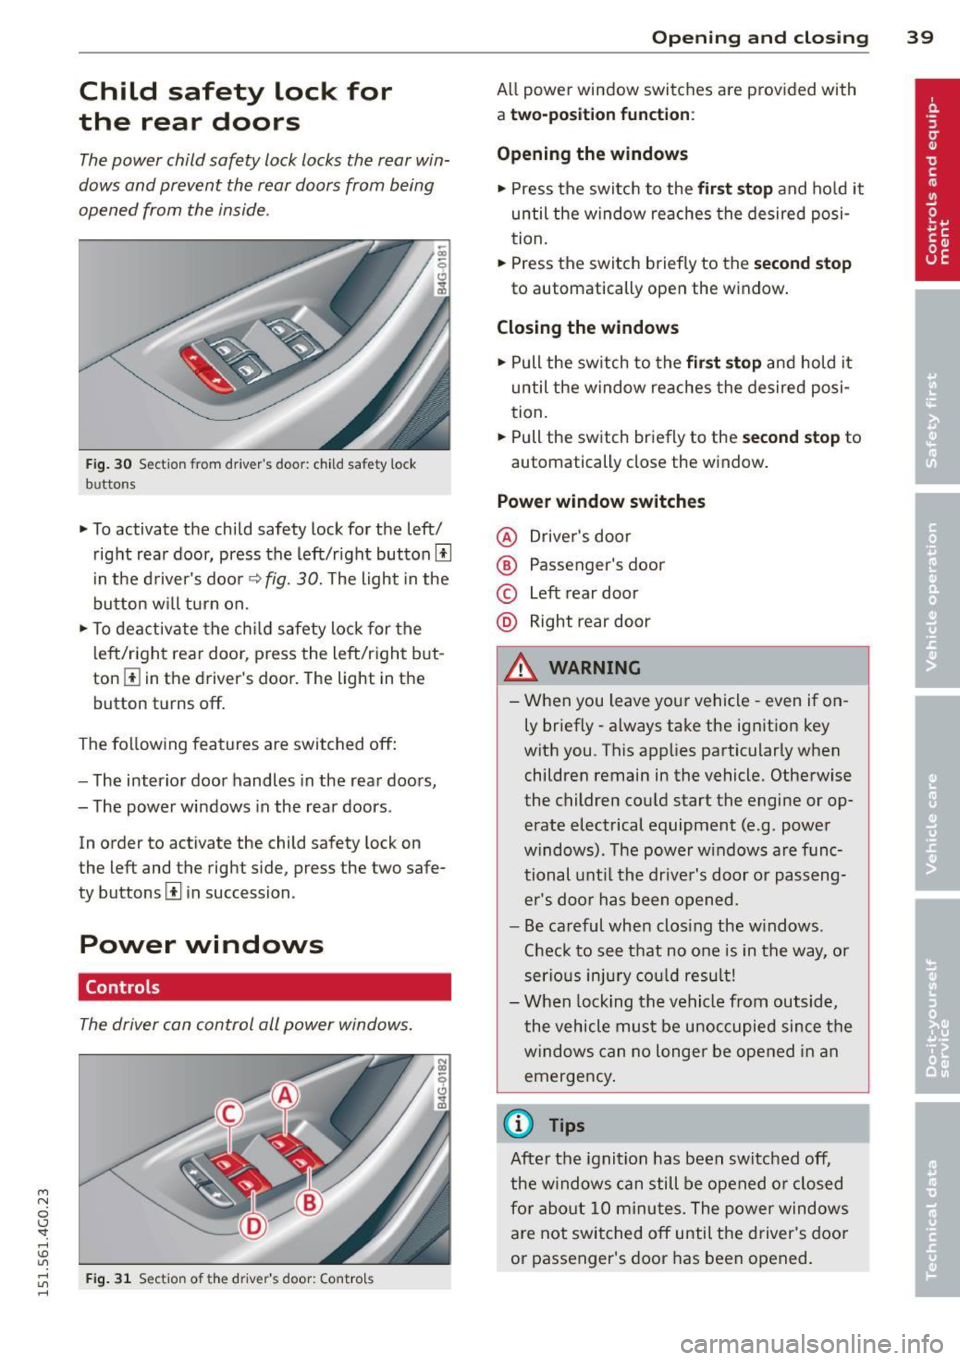 AUDI A6 2015  Owners Manual M N 
0 I.J "". rl I.O 
" rl 
" rl 
Child  safety  lock  for 
the  rear  doors 
The power  child safety  lock locks  the  rear  win­
dows  and  prevent  the  rear doors  from  being 
opened  from  t